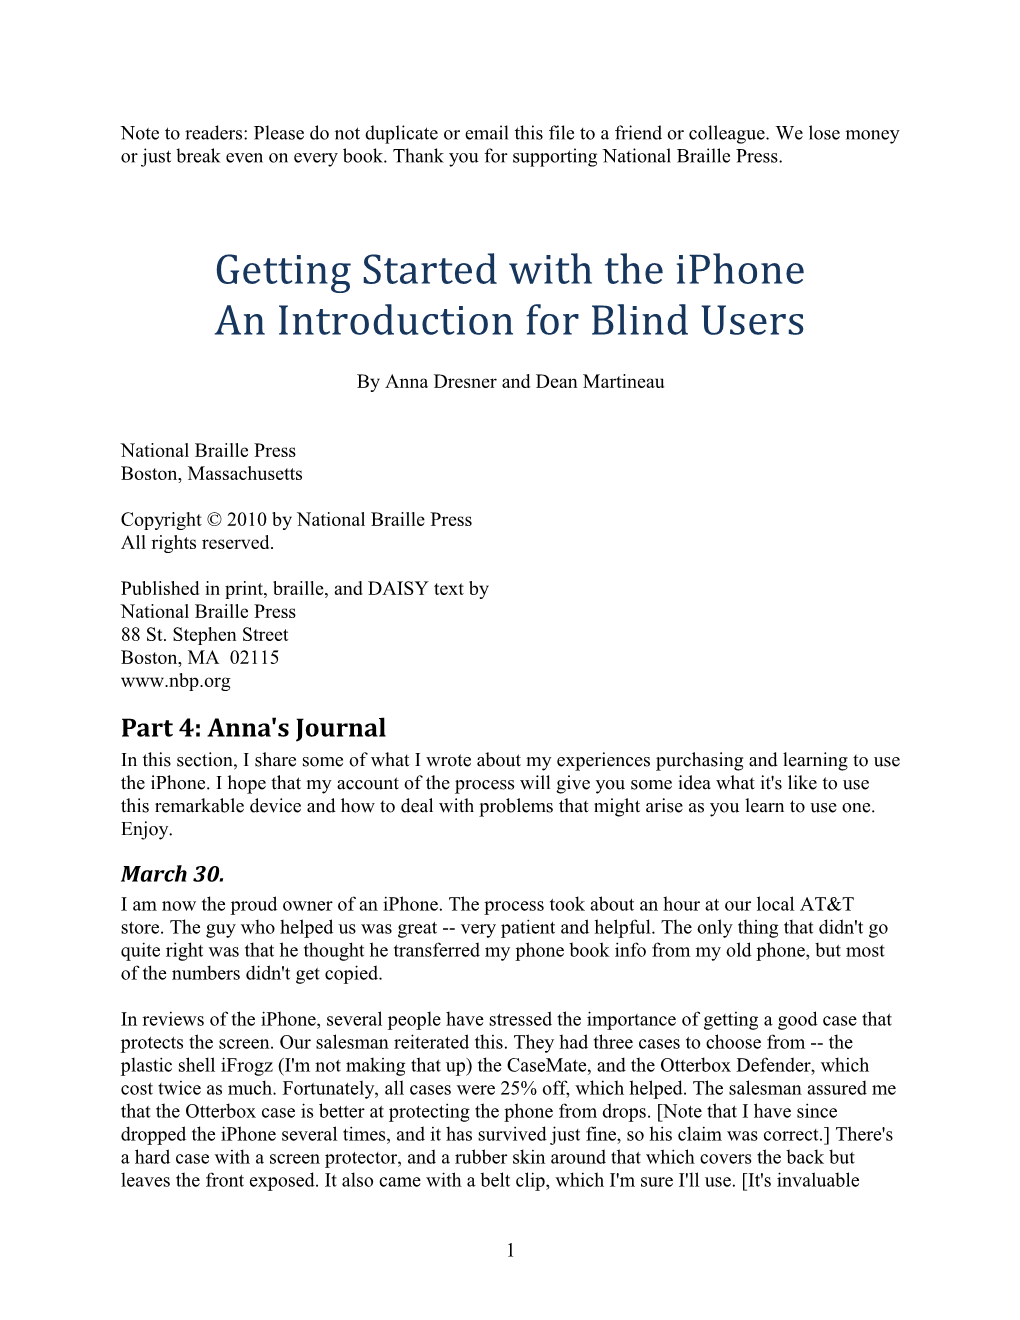 Getting Started With The Iphone